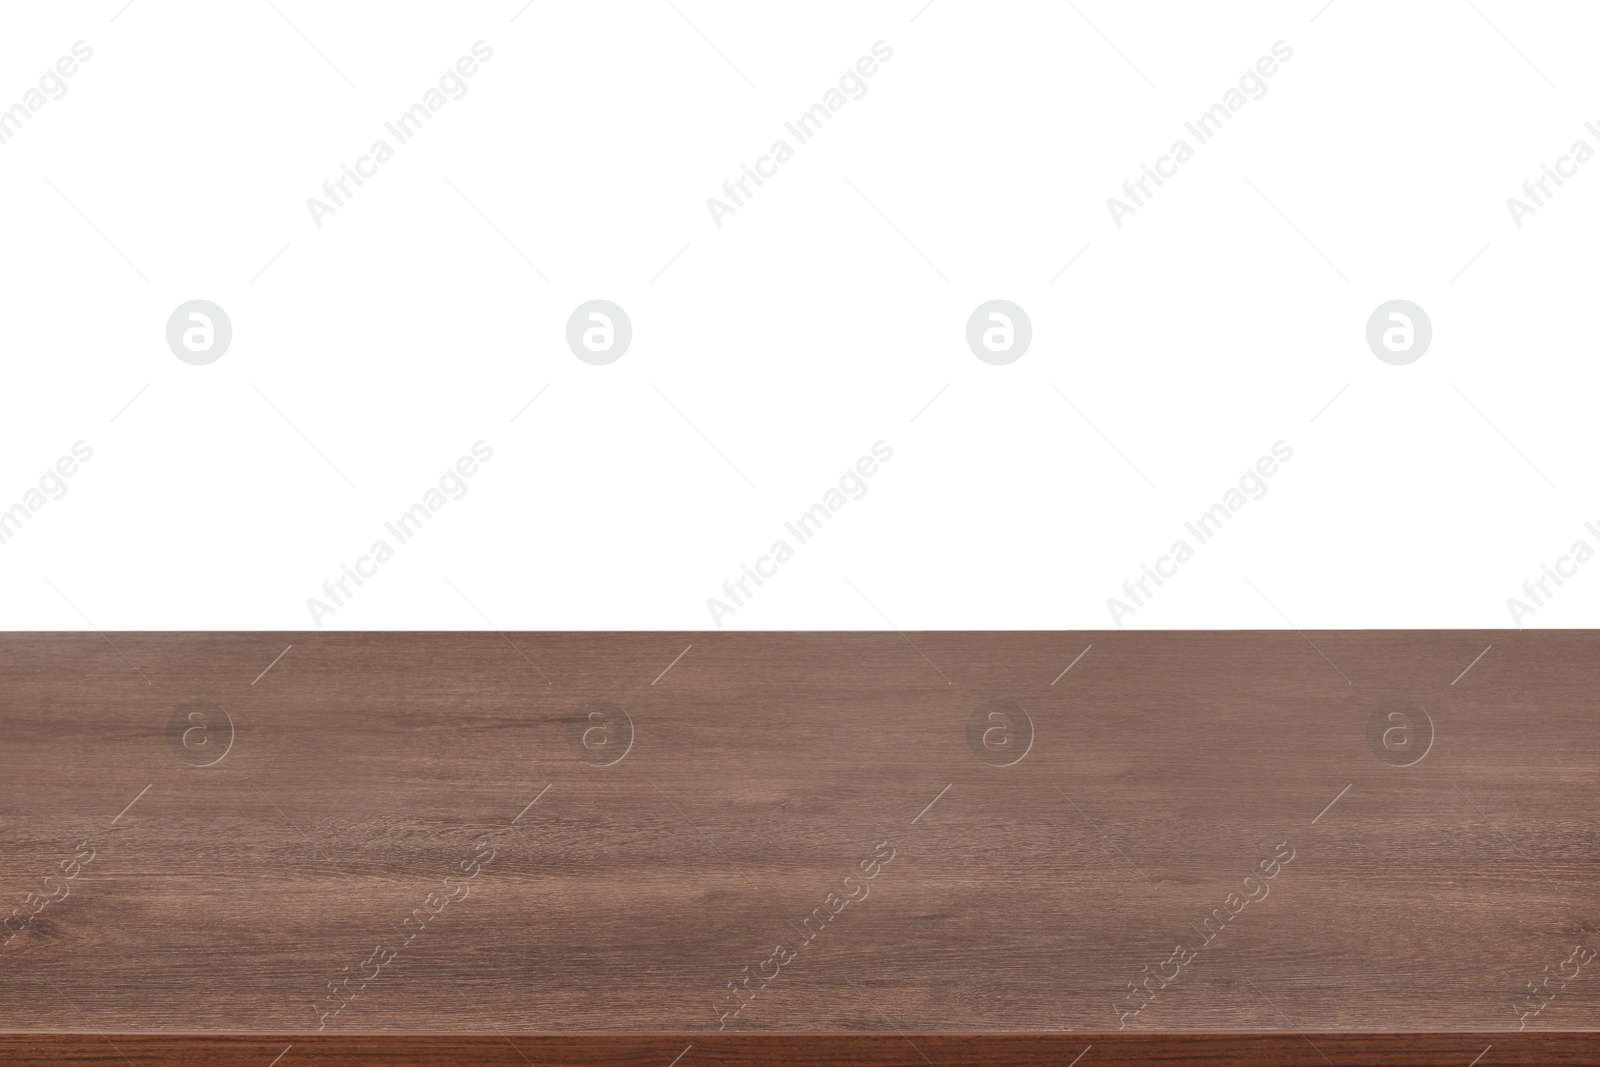 Photo of Empty brown wooden surface isolated on white